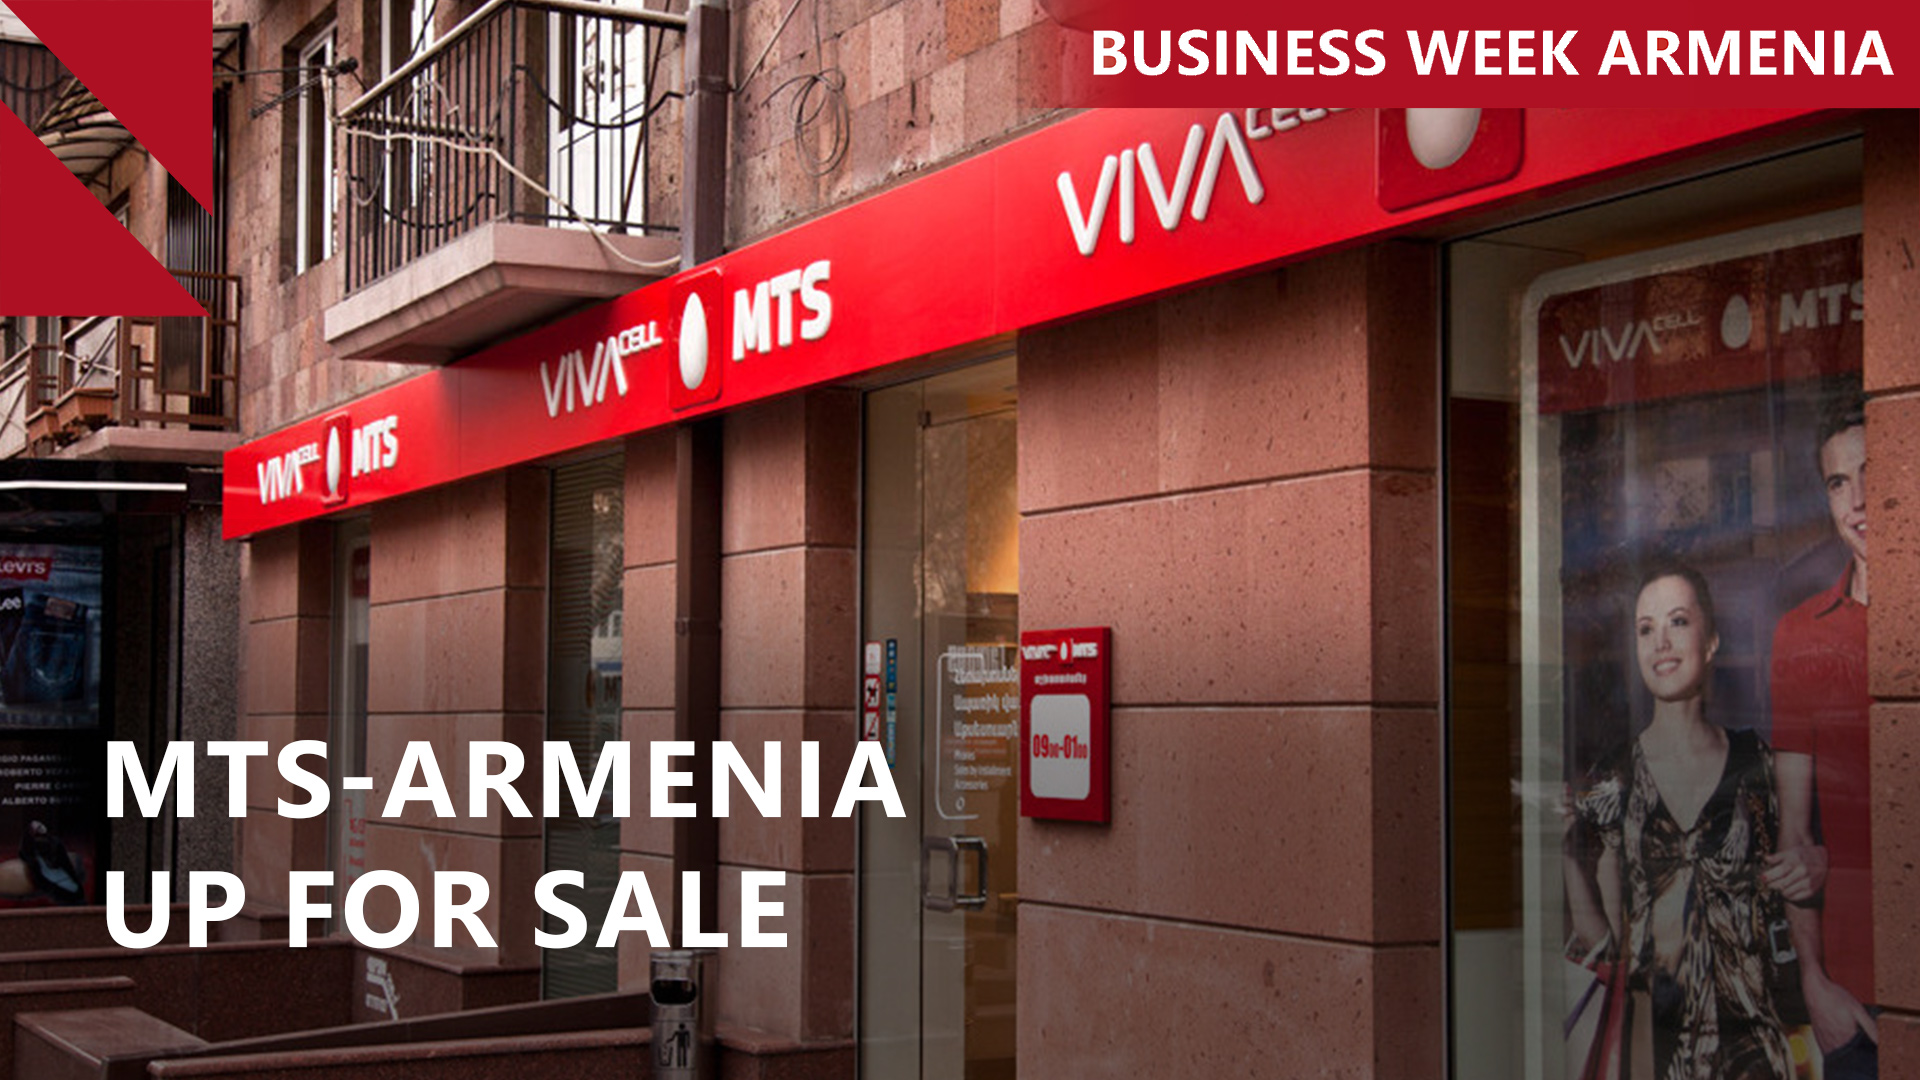 Armenia greenlights sale of country’s largest cellular company: THIS WEEK IN BUSINESS